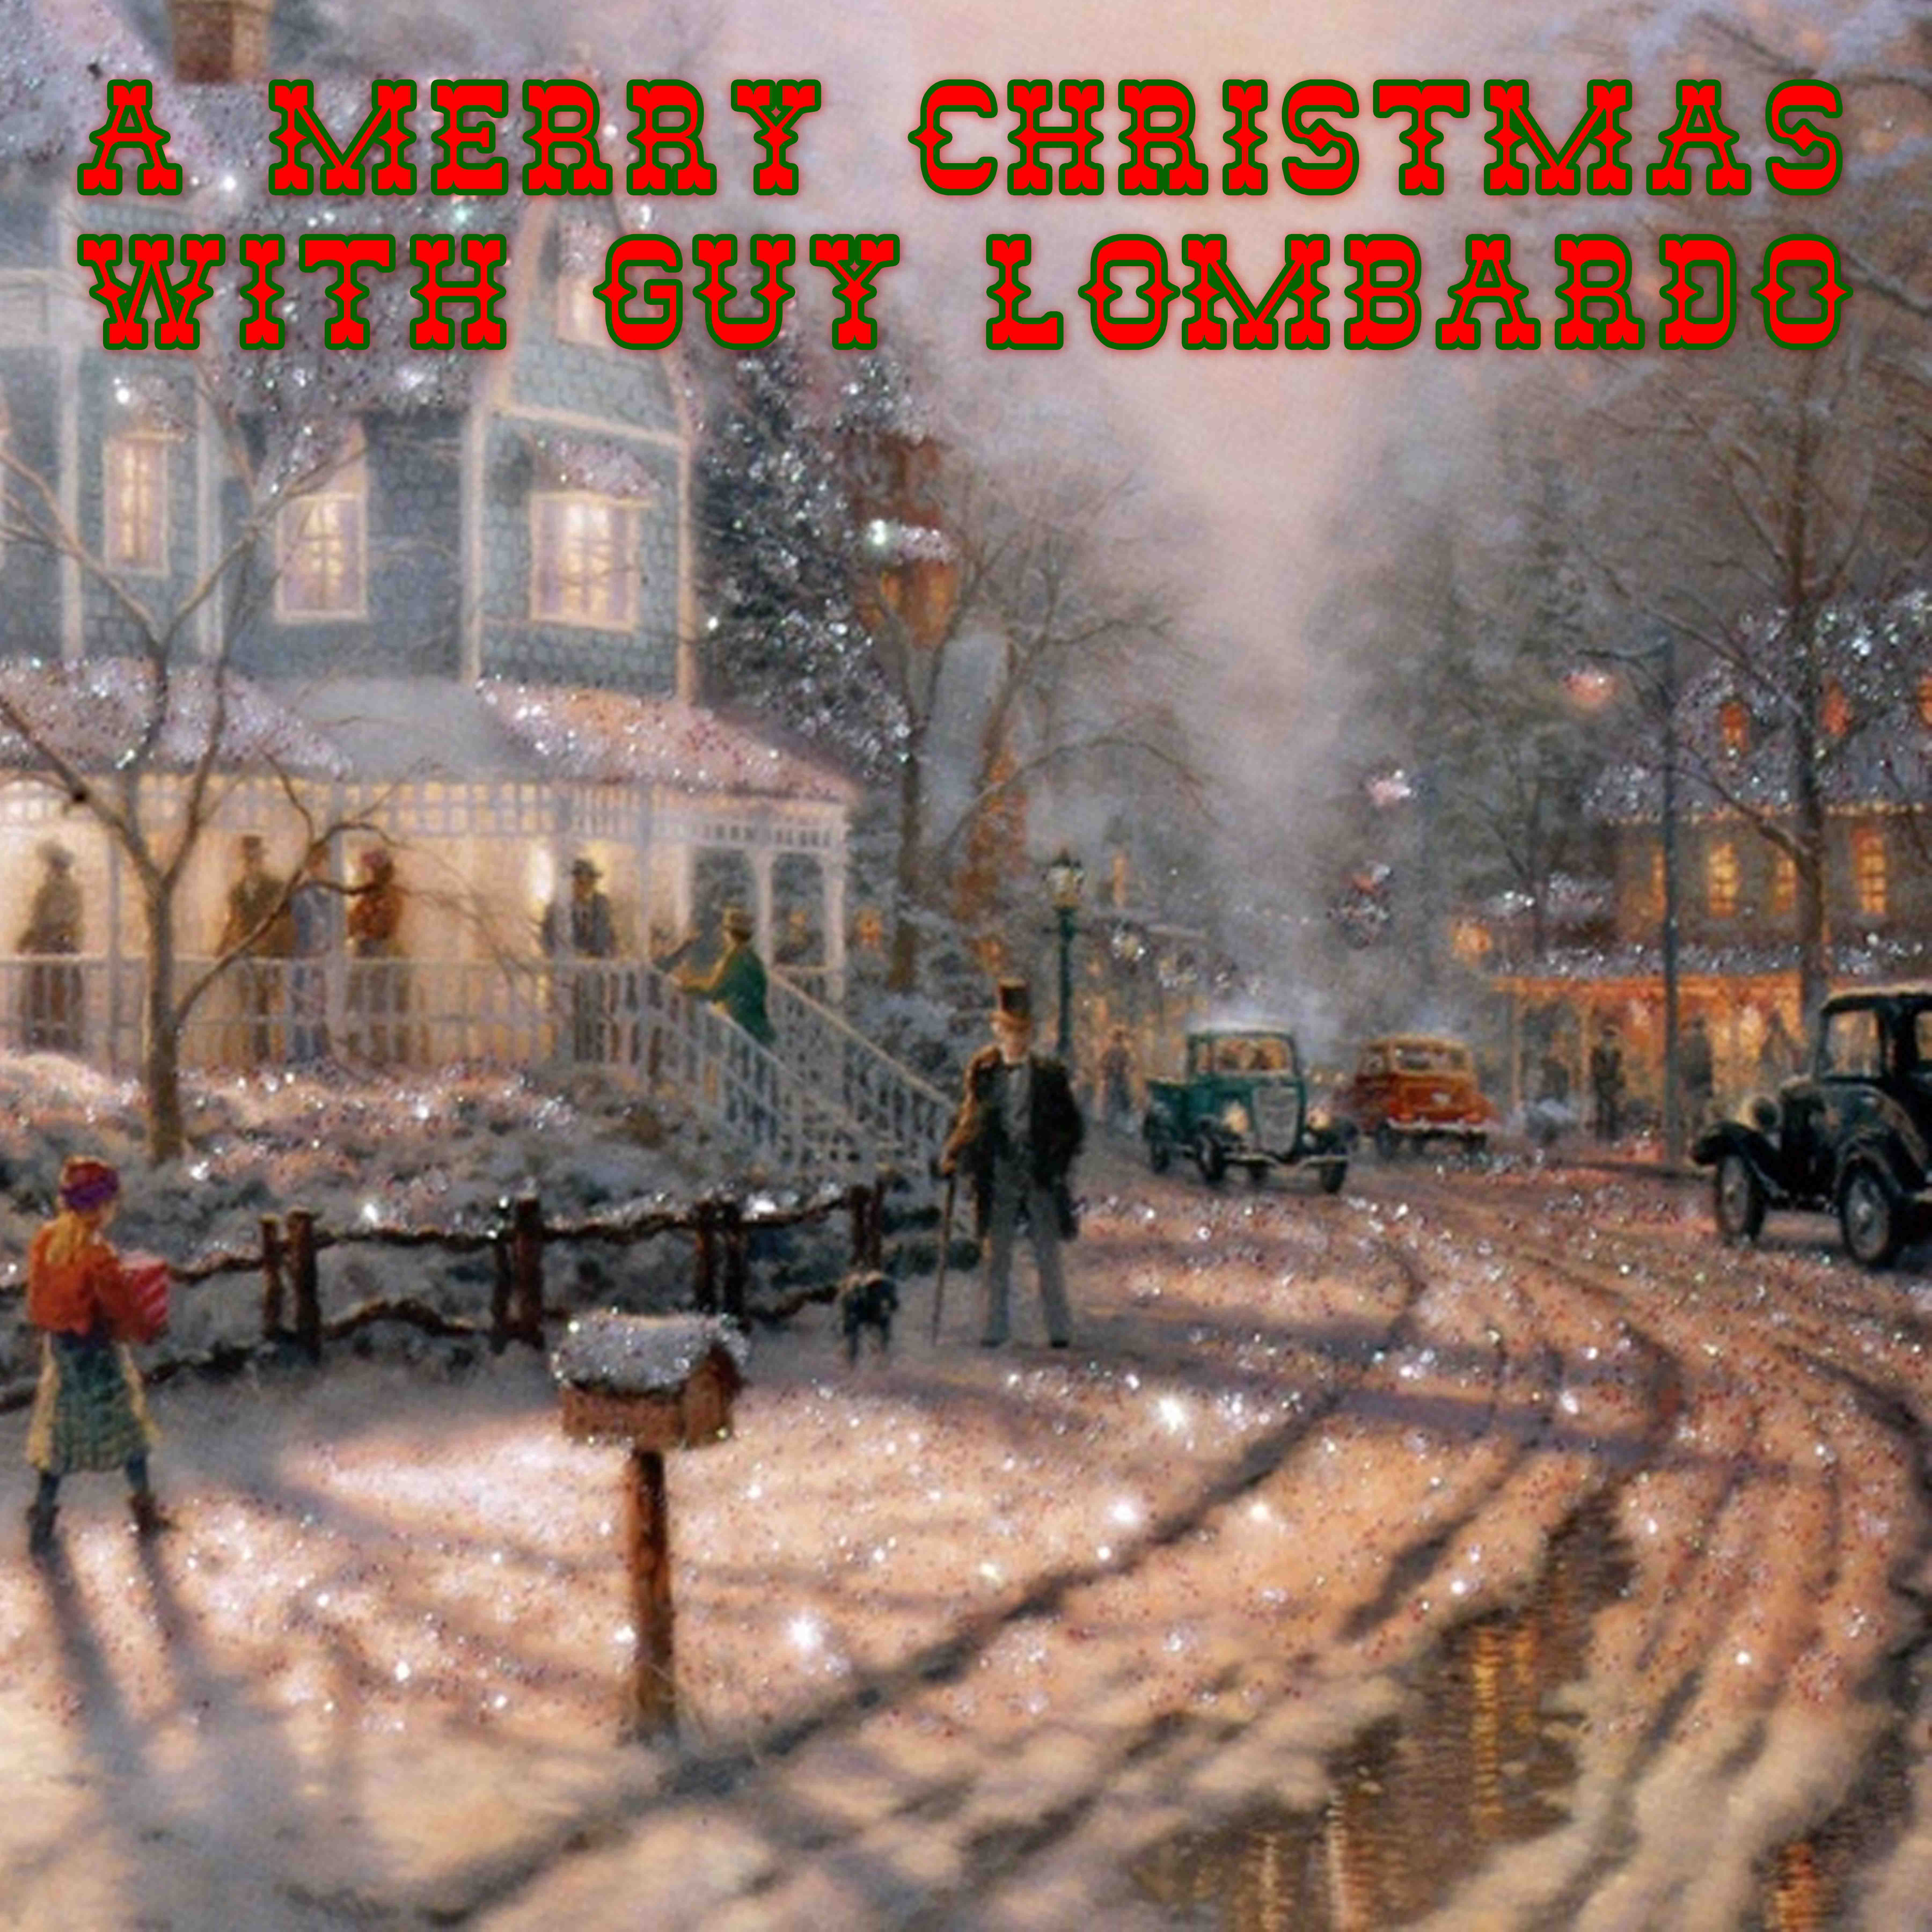 A Merry Christmas With Guy Lombardo